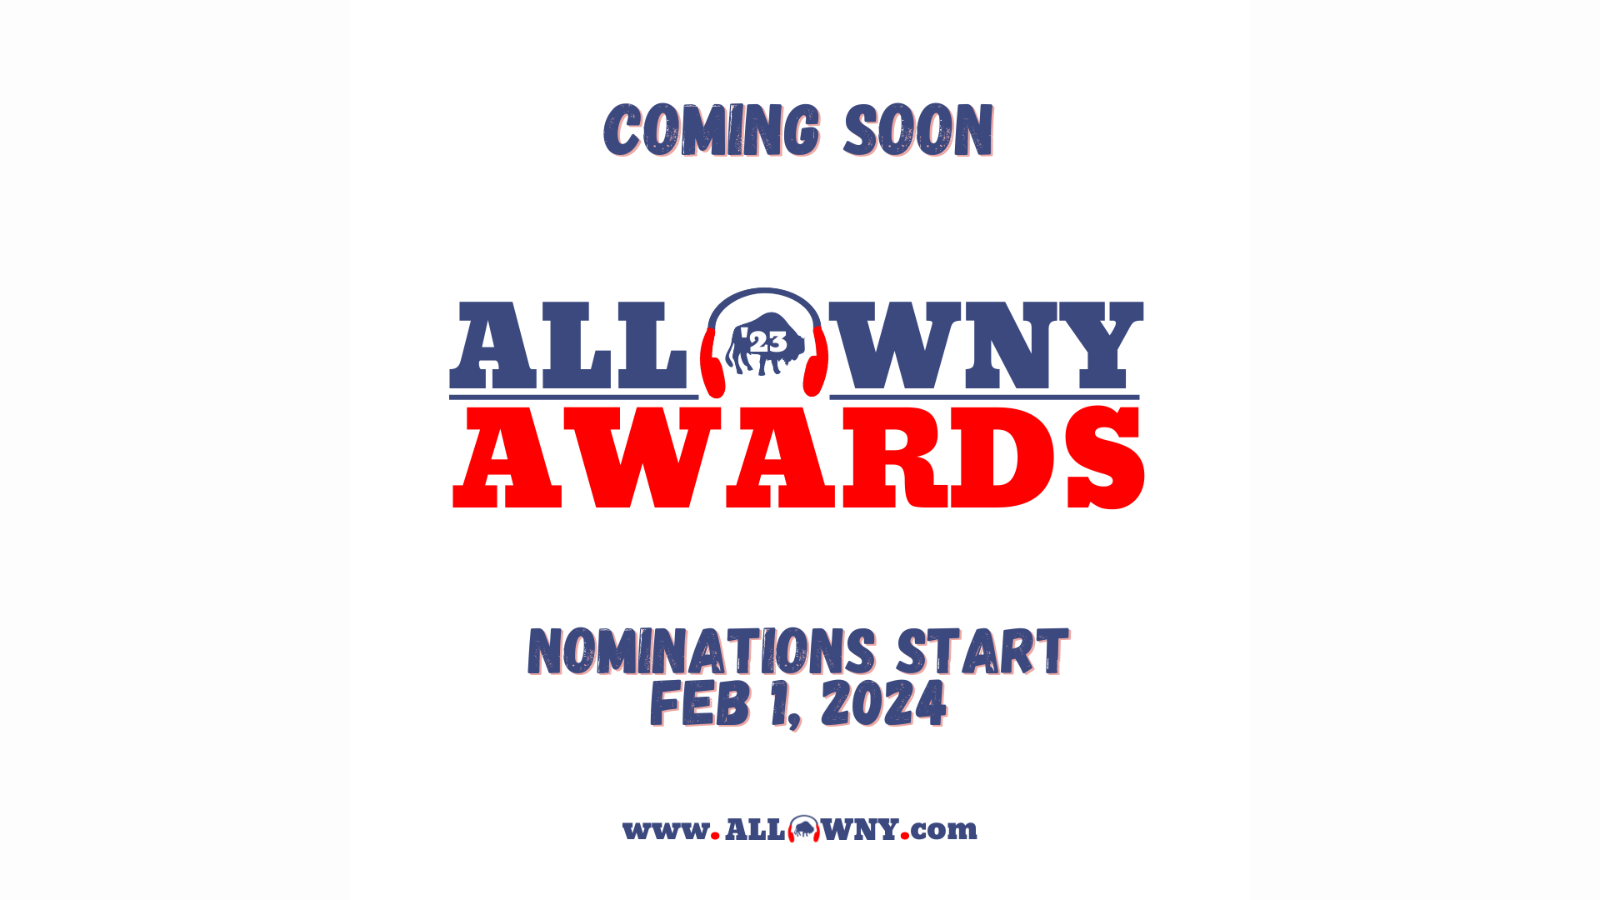 It's almost time for the All WNY Awards All WNY